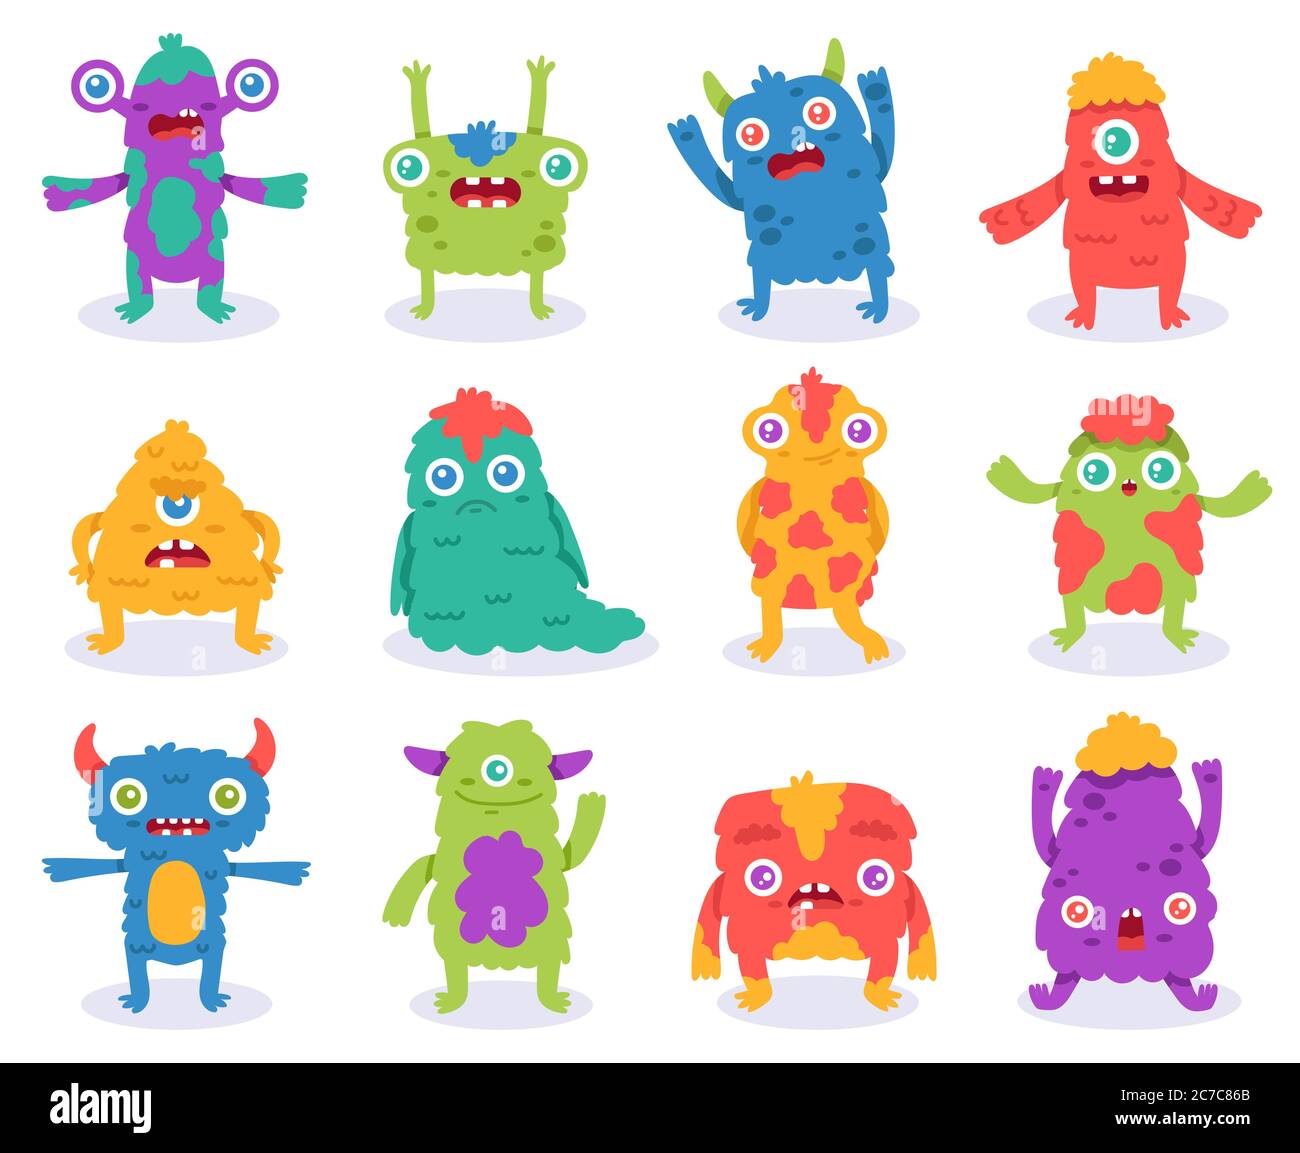 Cute monsters. Halloween cartoon monsters characters, funny fluffy creature, gremlin or alien, spooky monsters mascots vector illustration set Stock Vector